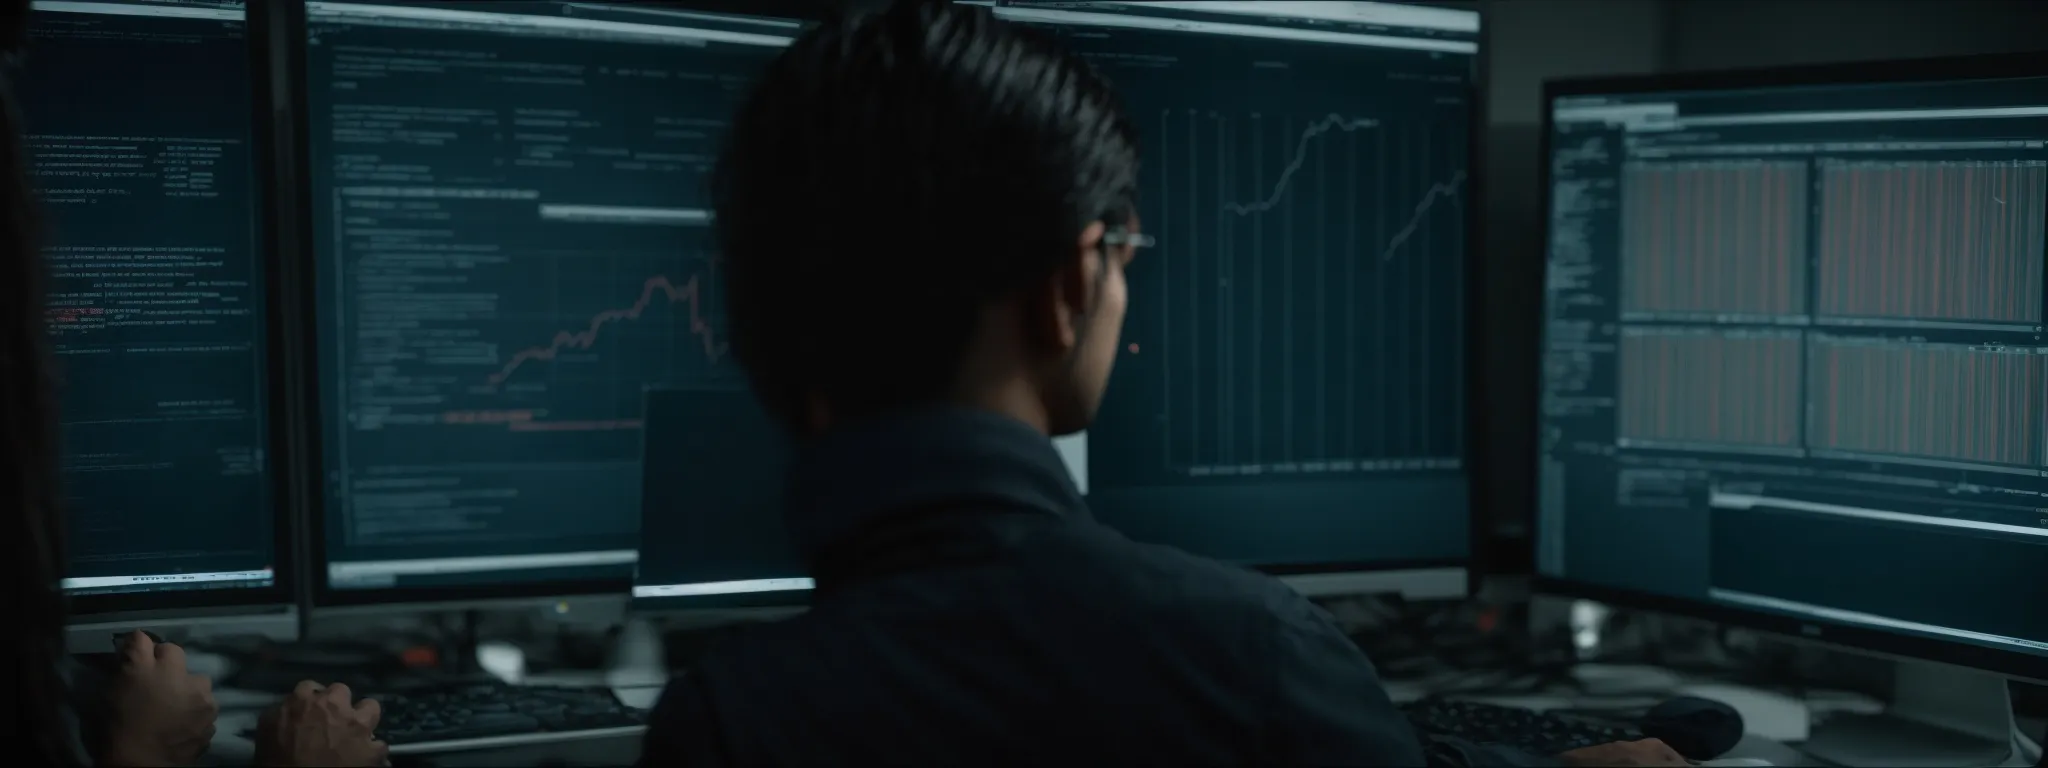 a person staring intently at a large, high-resolution computer screen, analyzing a complex website interface with various analytical tools open.